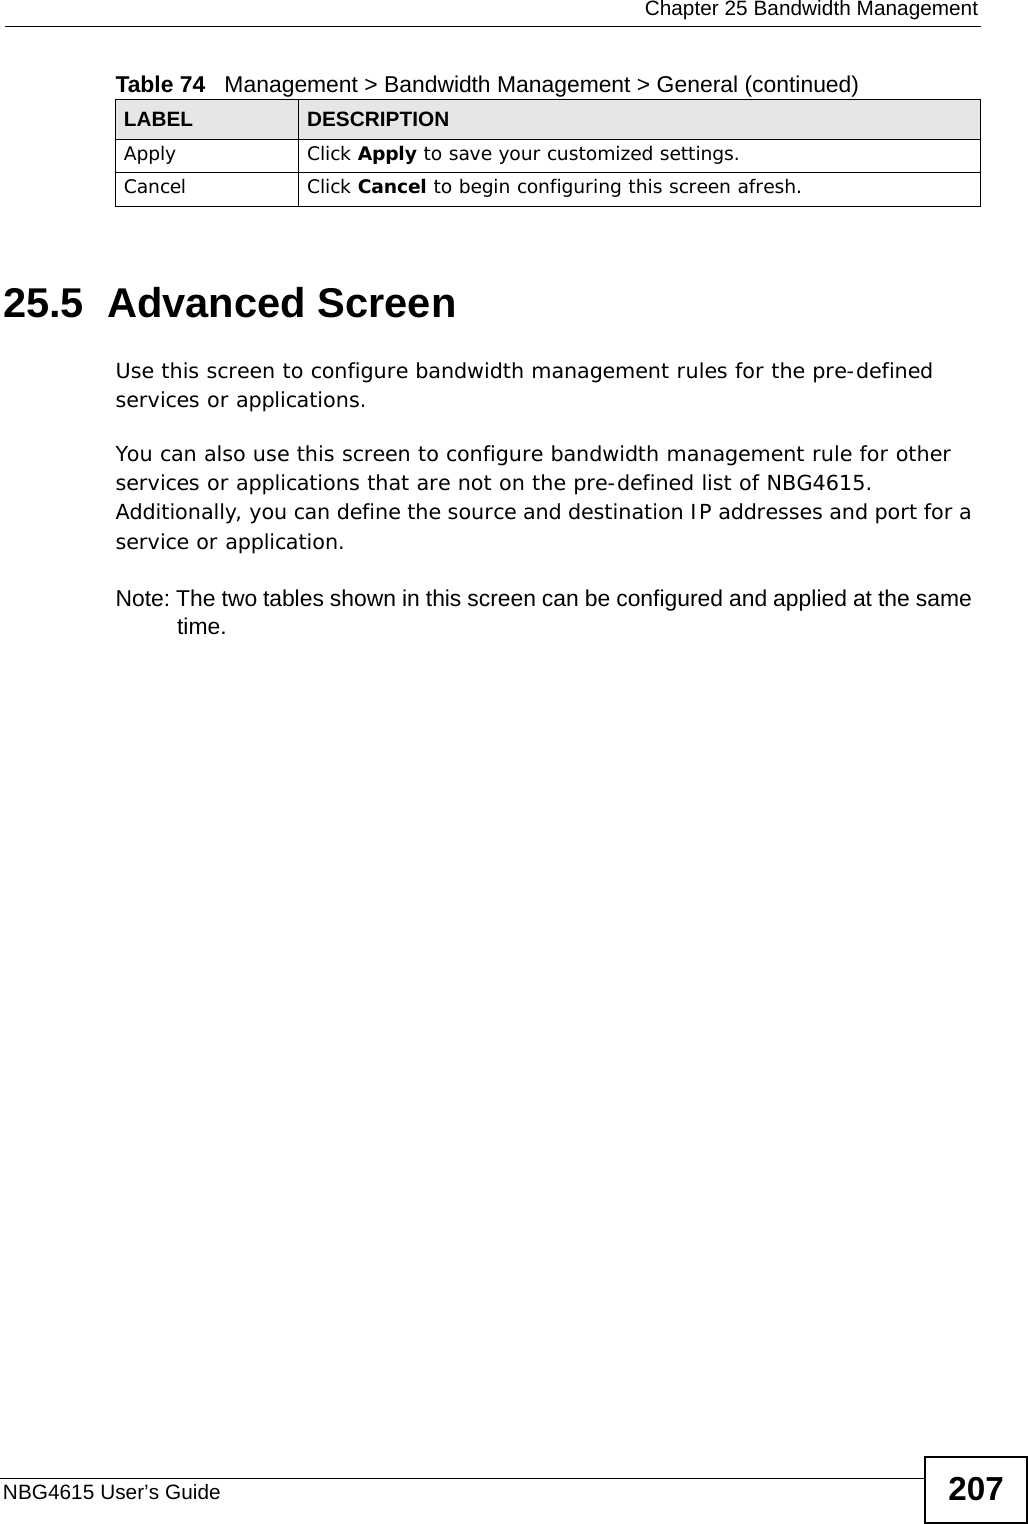  Chapter 25 Bandwidth ManagementNBG4615 User’s Guide 20725.5  Advanced Screen Use this screen to configure bandwidth management rules for the pre-defined services or applications. You can also use this screen to configure bandwidth management rule for other services or applications that are not on the pre-defined list of NBG4615. Additionally, you can define the source and destination IP addresses and port for a service or application.Note: The two tables shown in this screen can be configured and applied at the same time. Apply Click Apply to save your customized settings.Cancel Click Cancel to begin configuring this screen afresh.Table 74   Management &gt; Bandwidth Management &gt; General (continued)LABEL DESCRIPTION